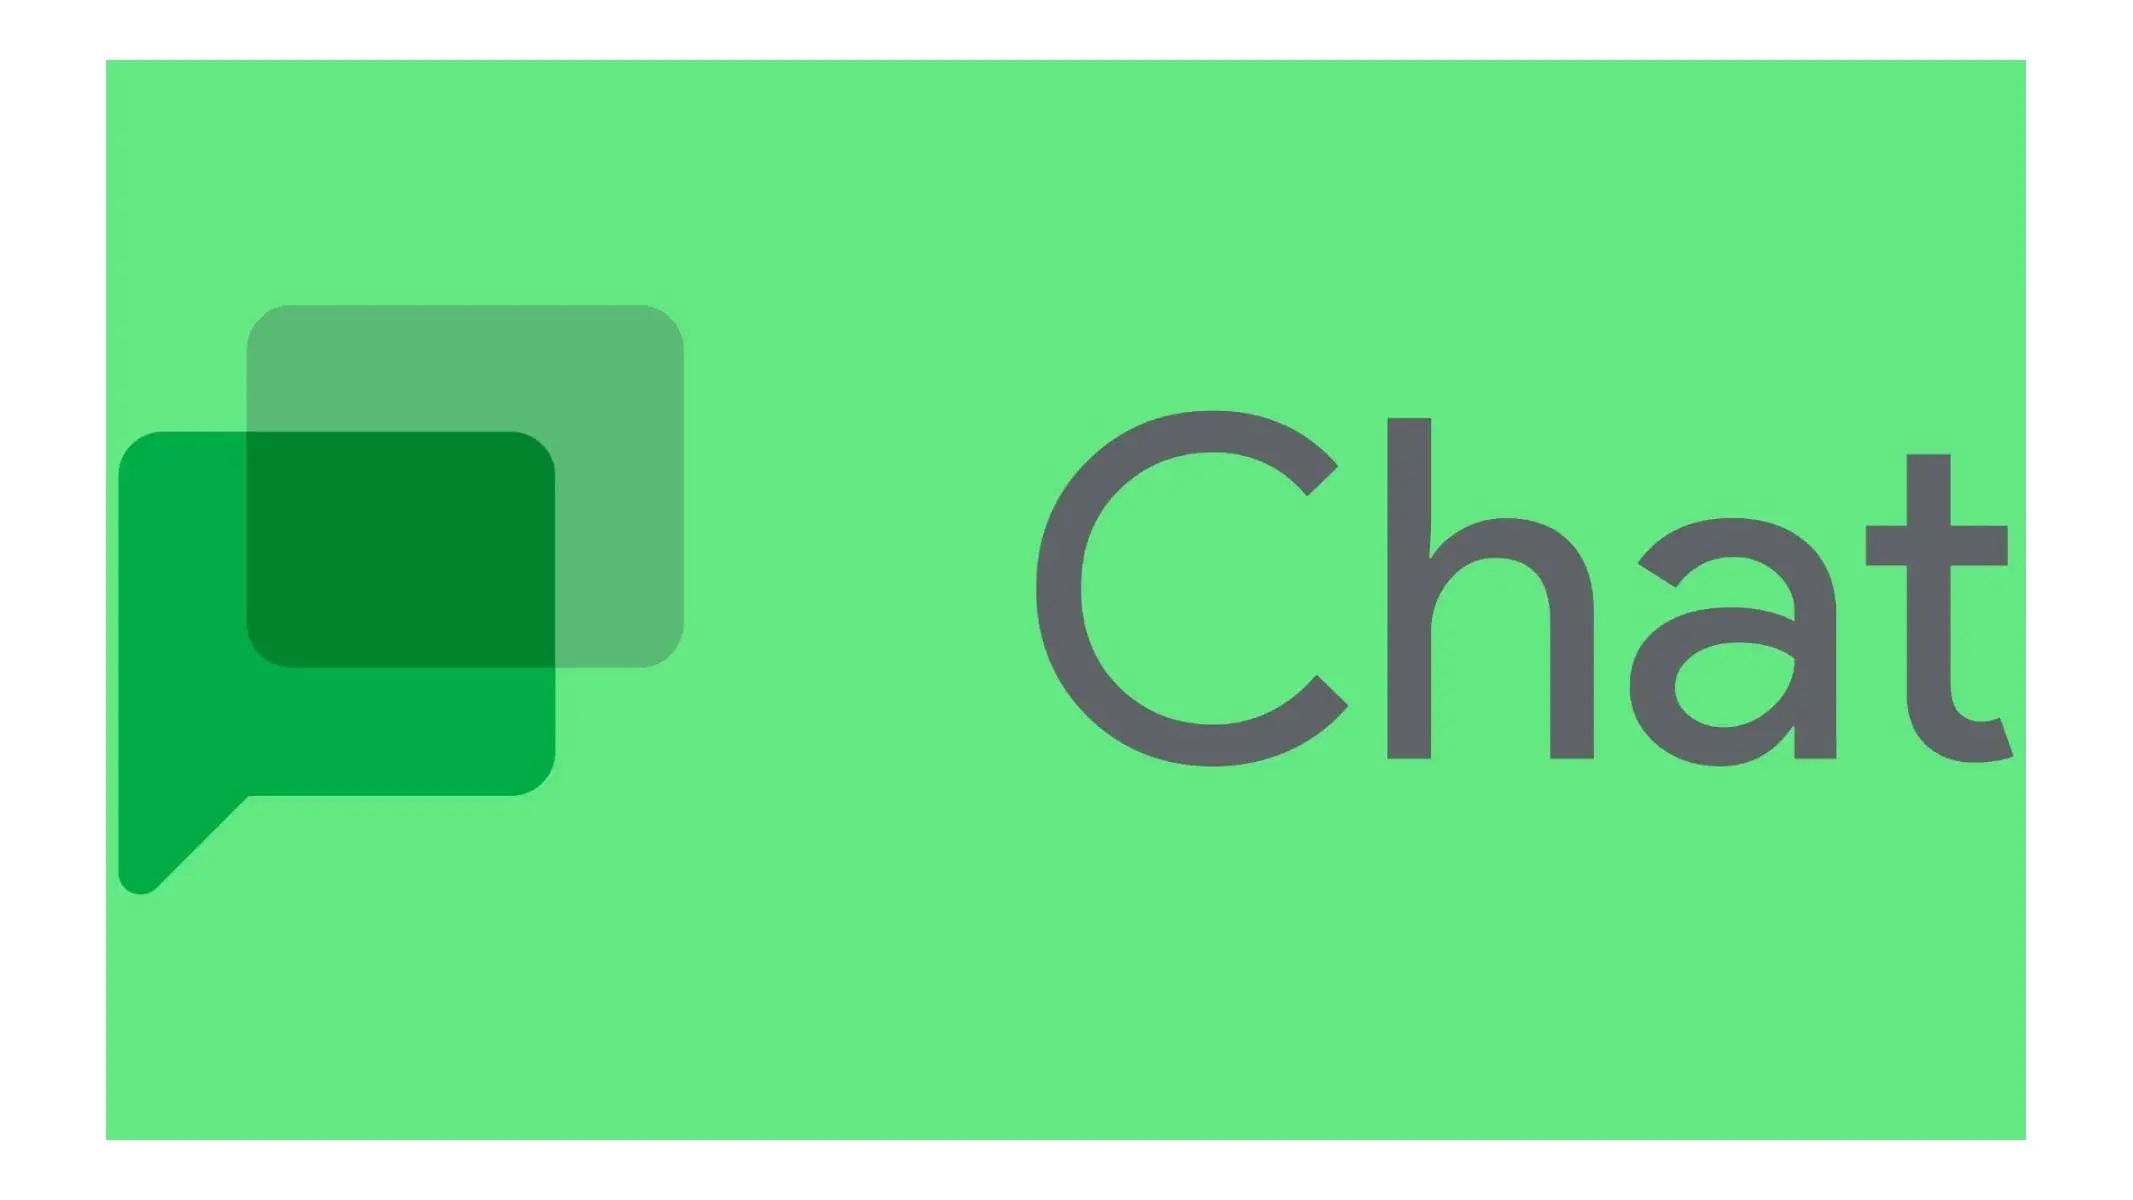 How to optimally use Google Chat with these top features